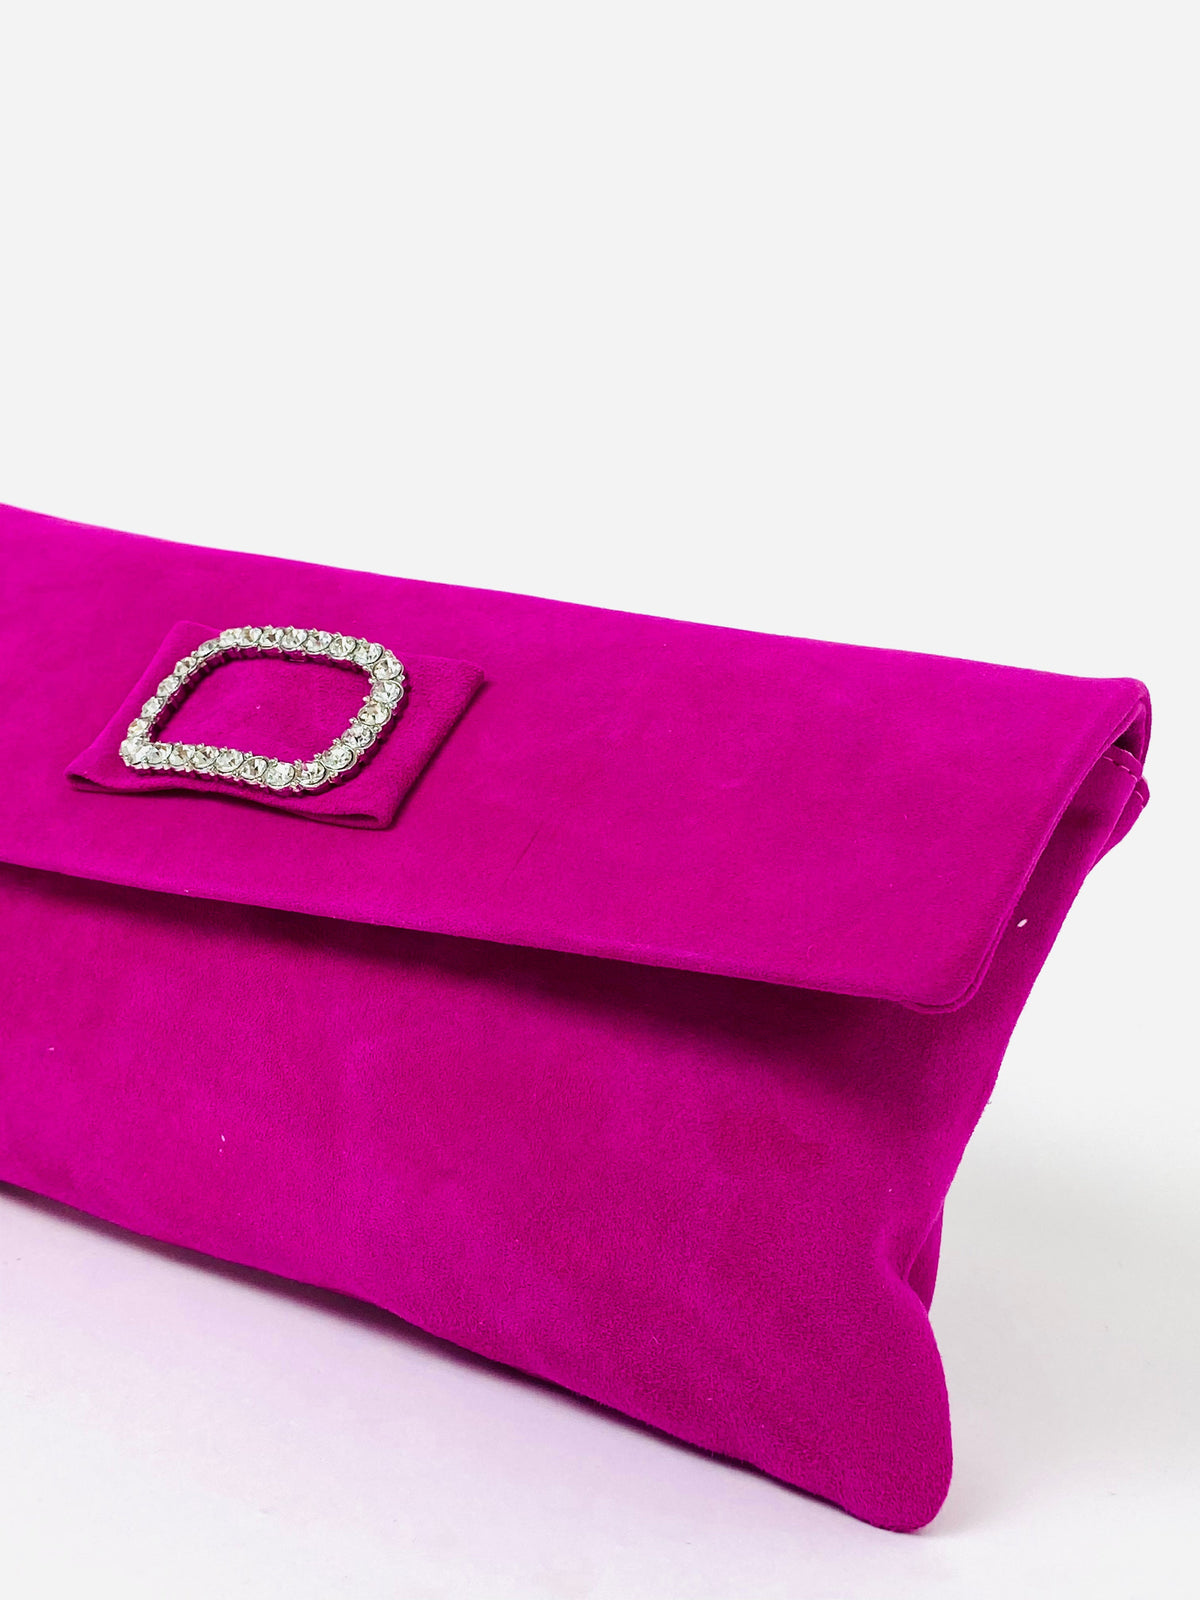 Le Babe - Bomilly Fuschia Pink Clutch bag*